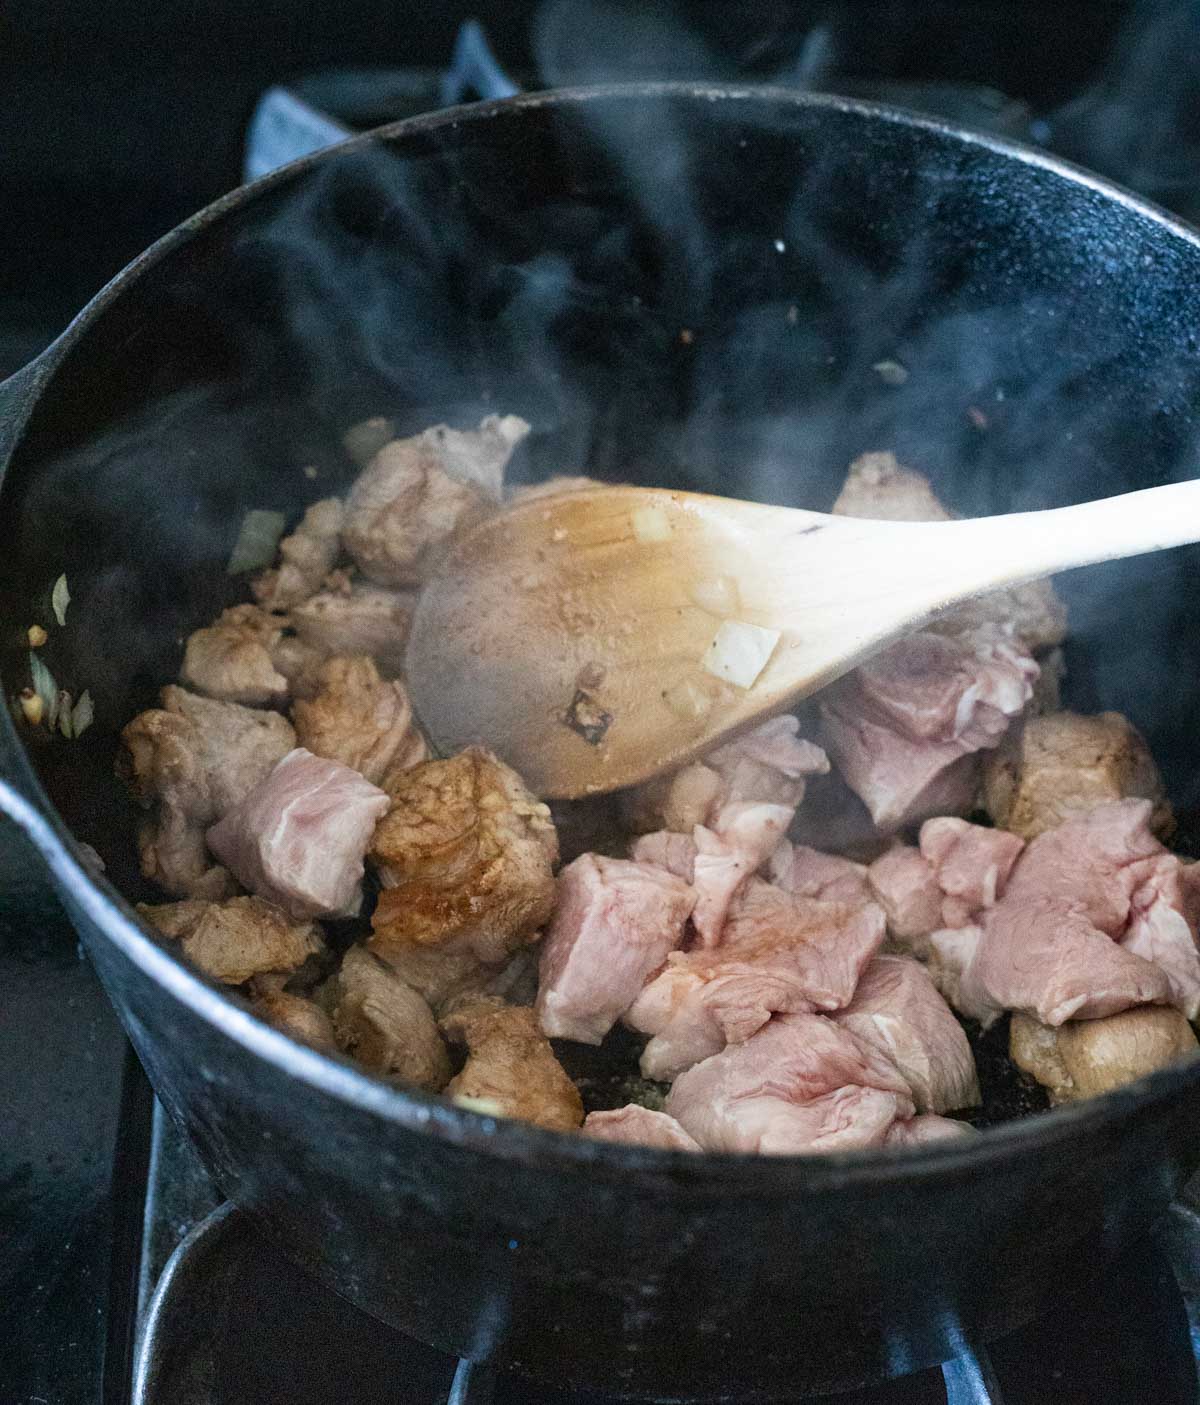 Pieces of veal browning in a Dutch oven on the stovetop.